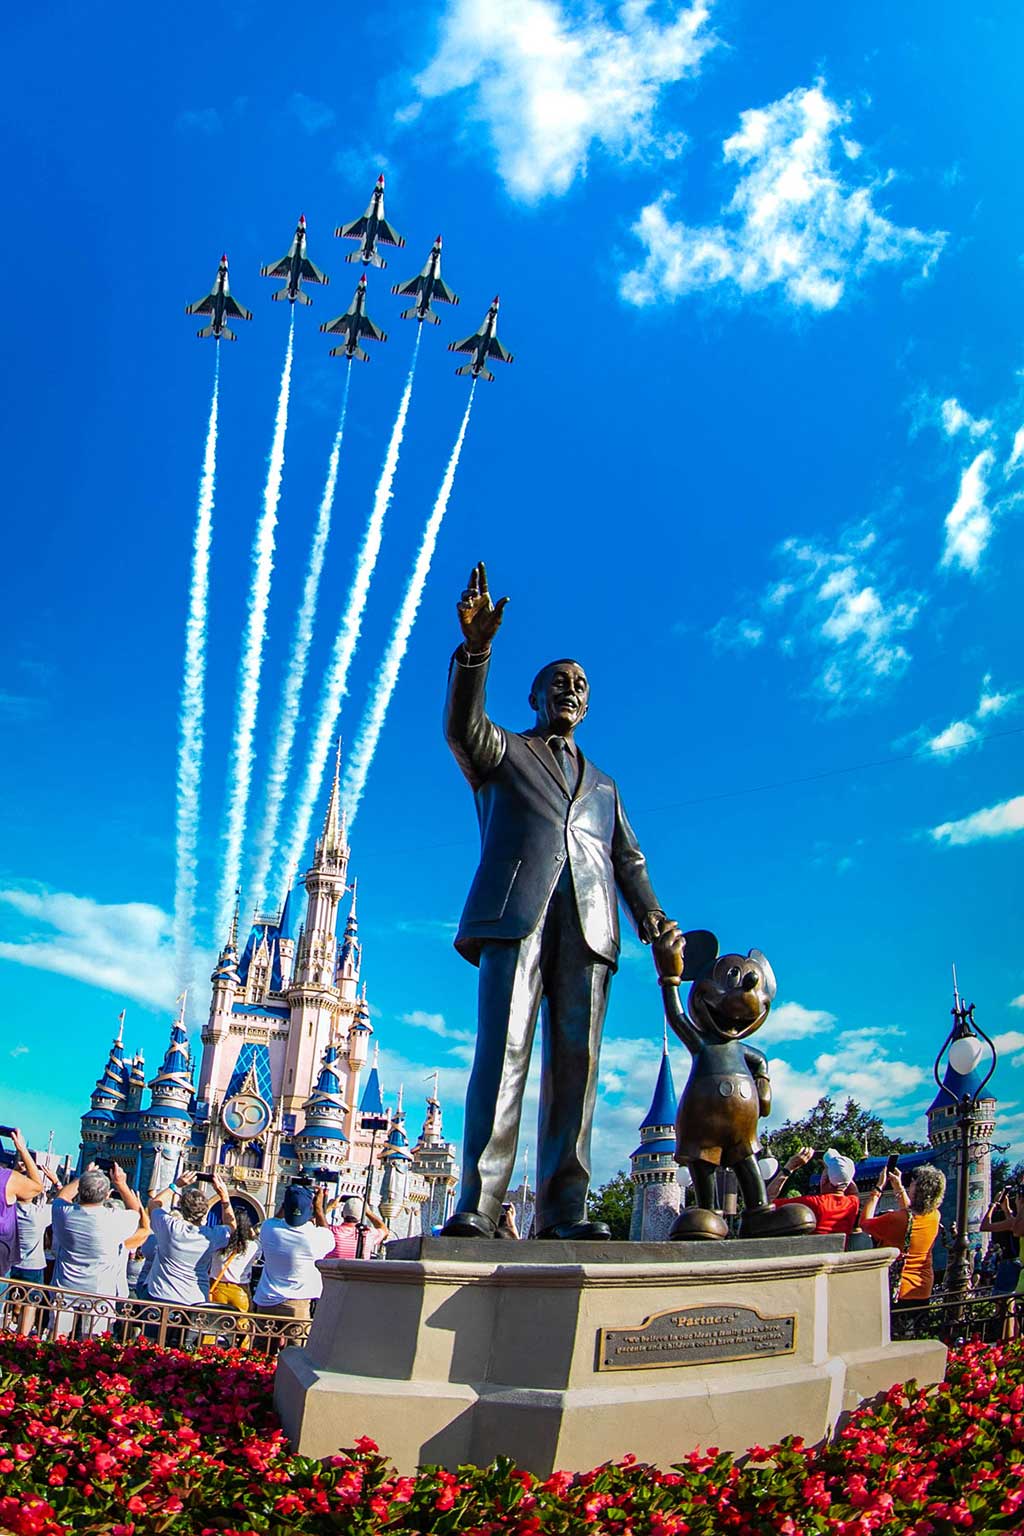  U.S. Air Force Thunderbirds fly over Cinderella Castle at Magic Kingdom Park at Walt Disney World Resort in Lake Buena Vista, Fla., Oct. 27, 2022, as a prelude to the beginning of National Veterans and Military Families Month in November. (Olga Thompson, Photographer) 